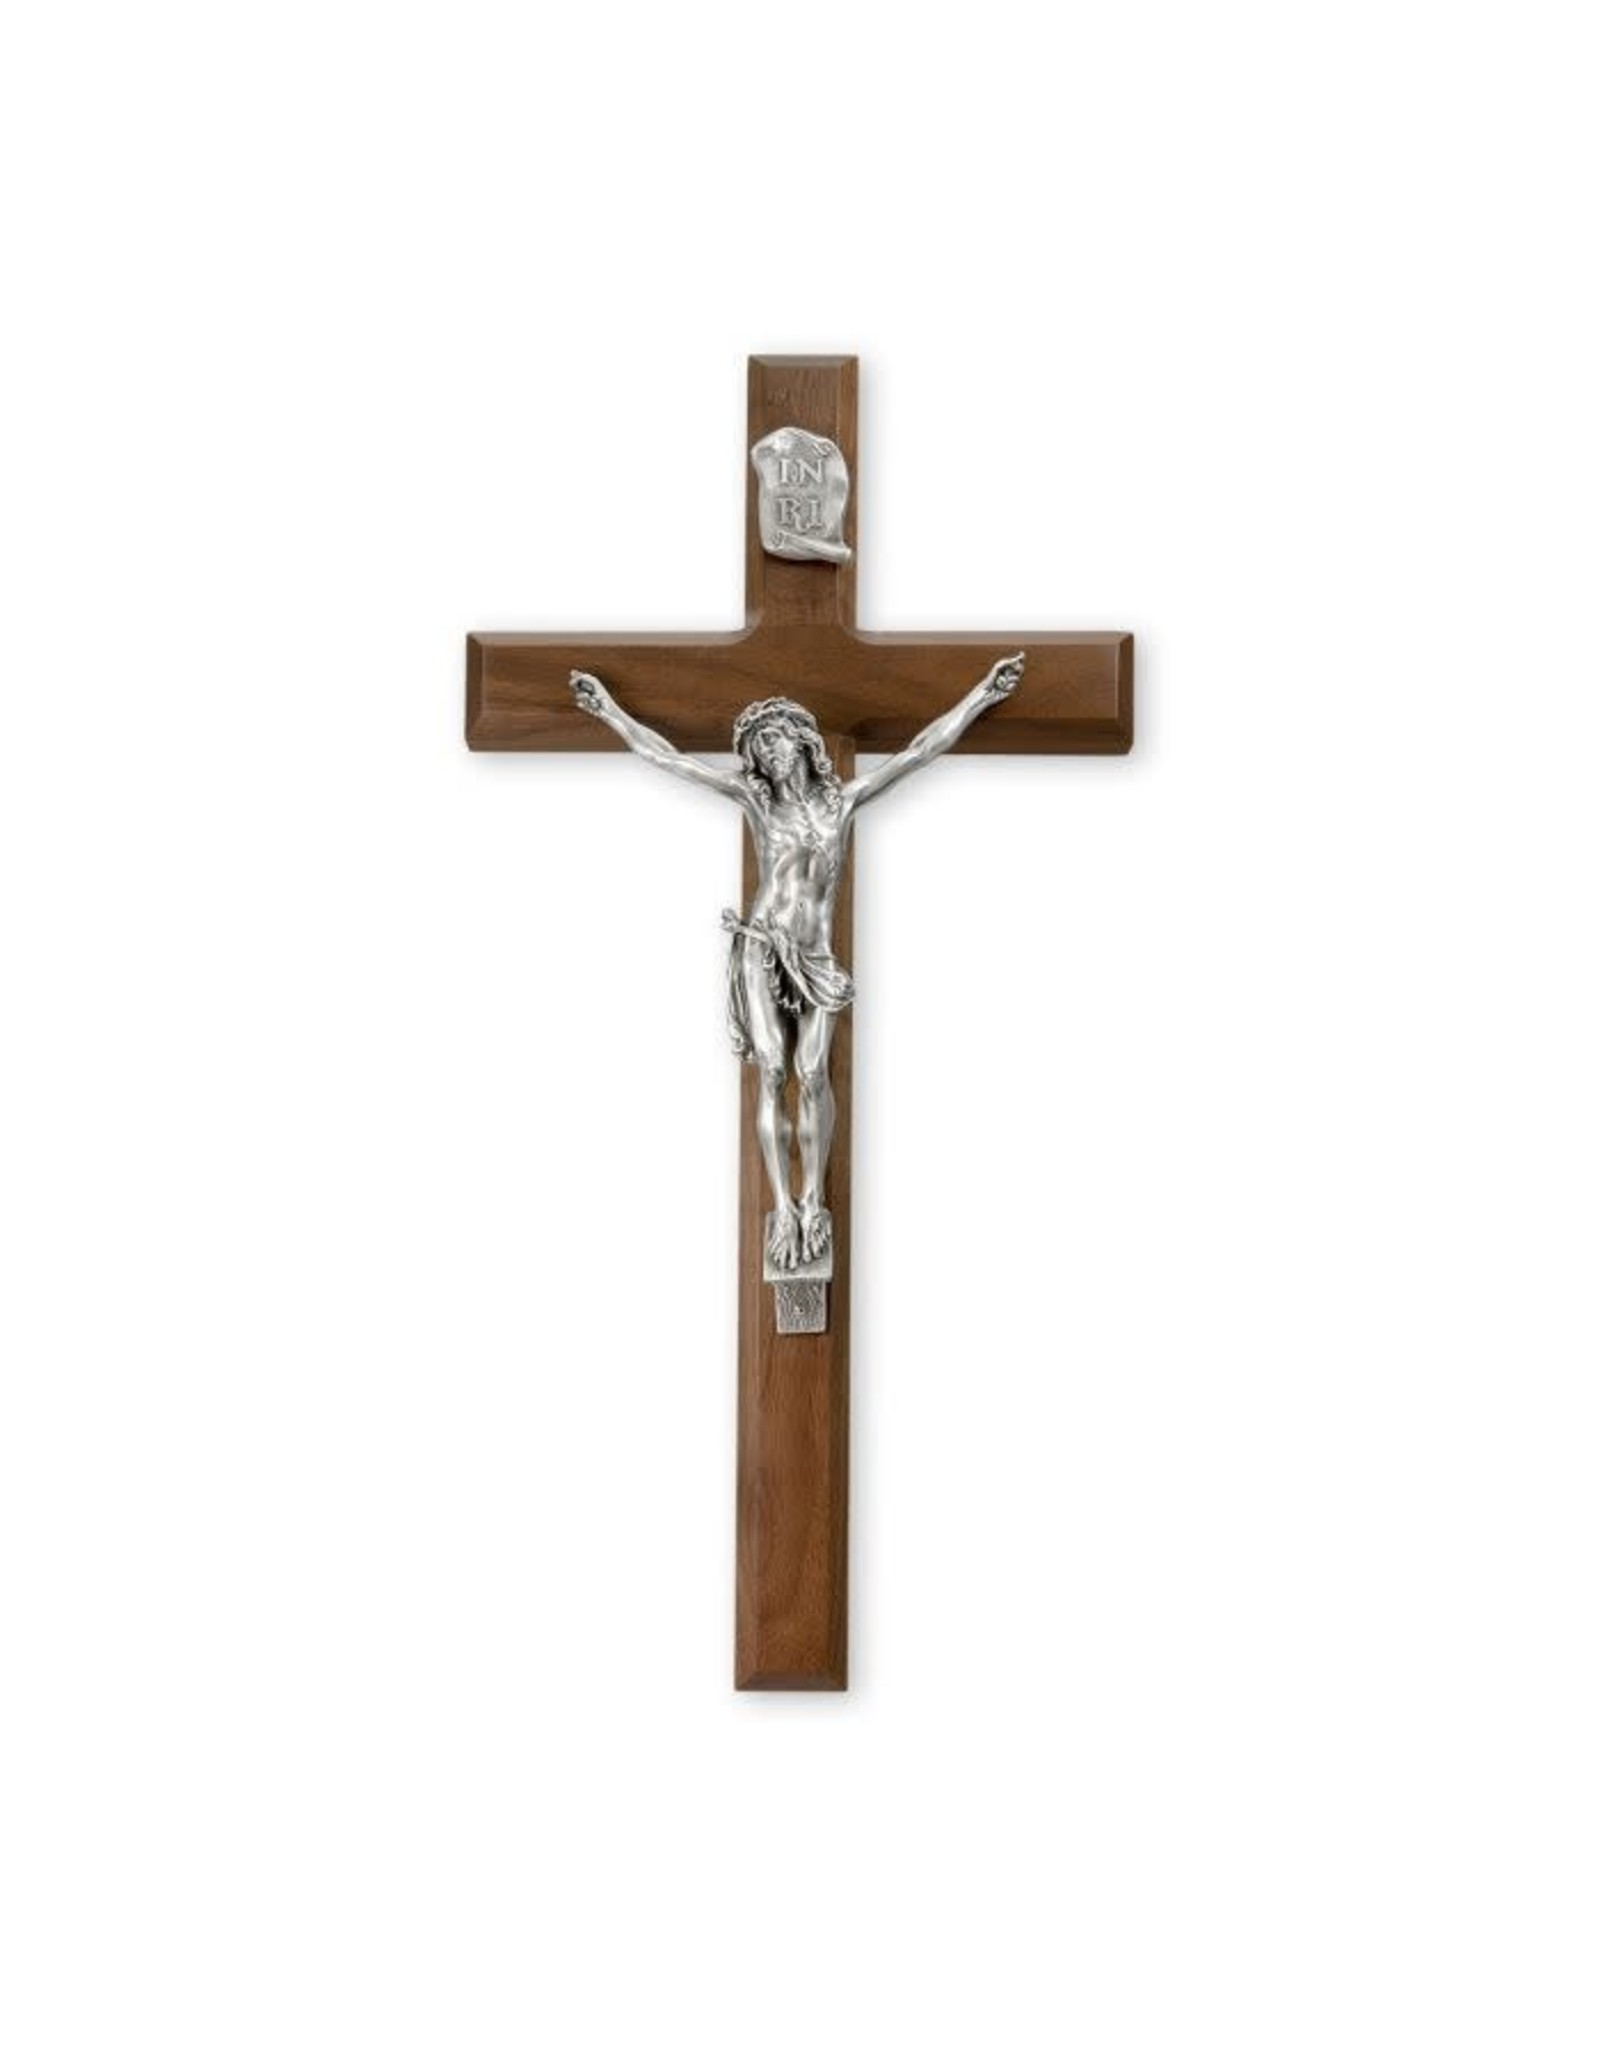 15" Walnut Cross with Antique Plated Corpus